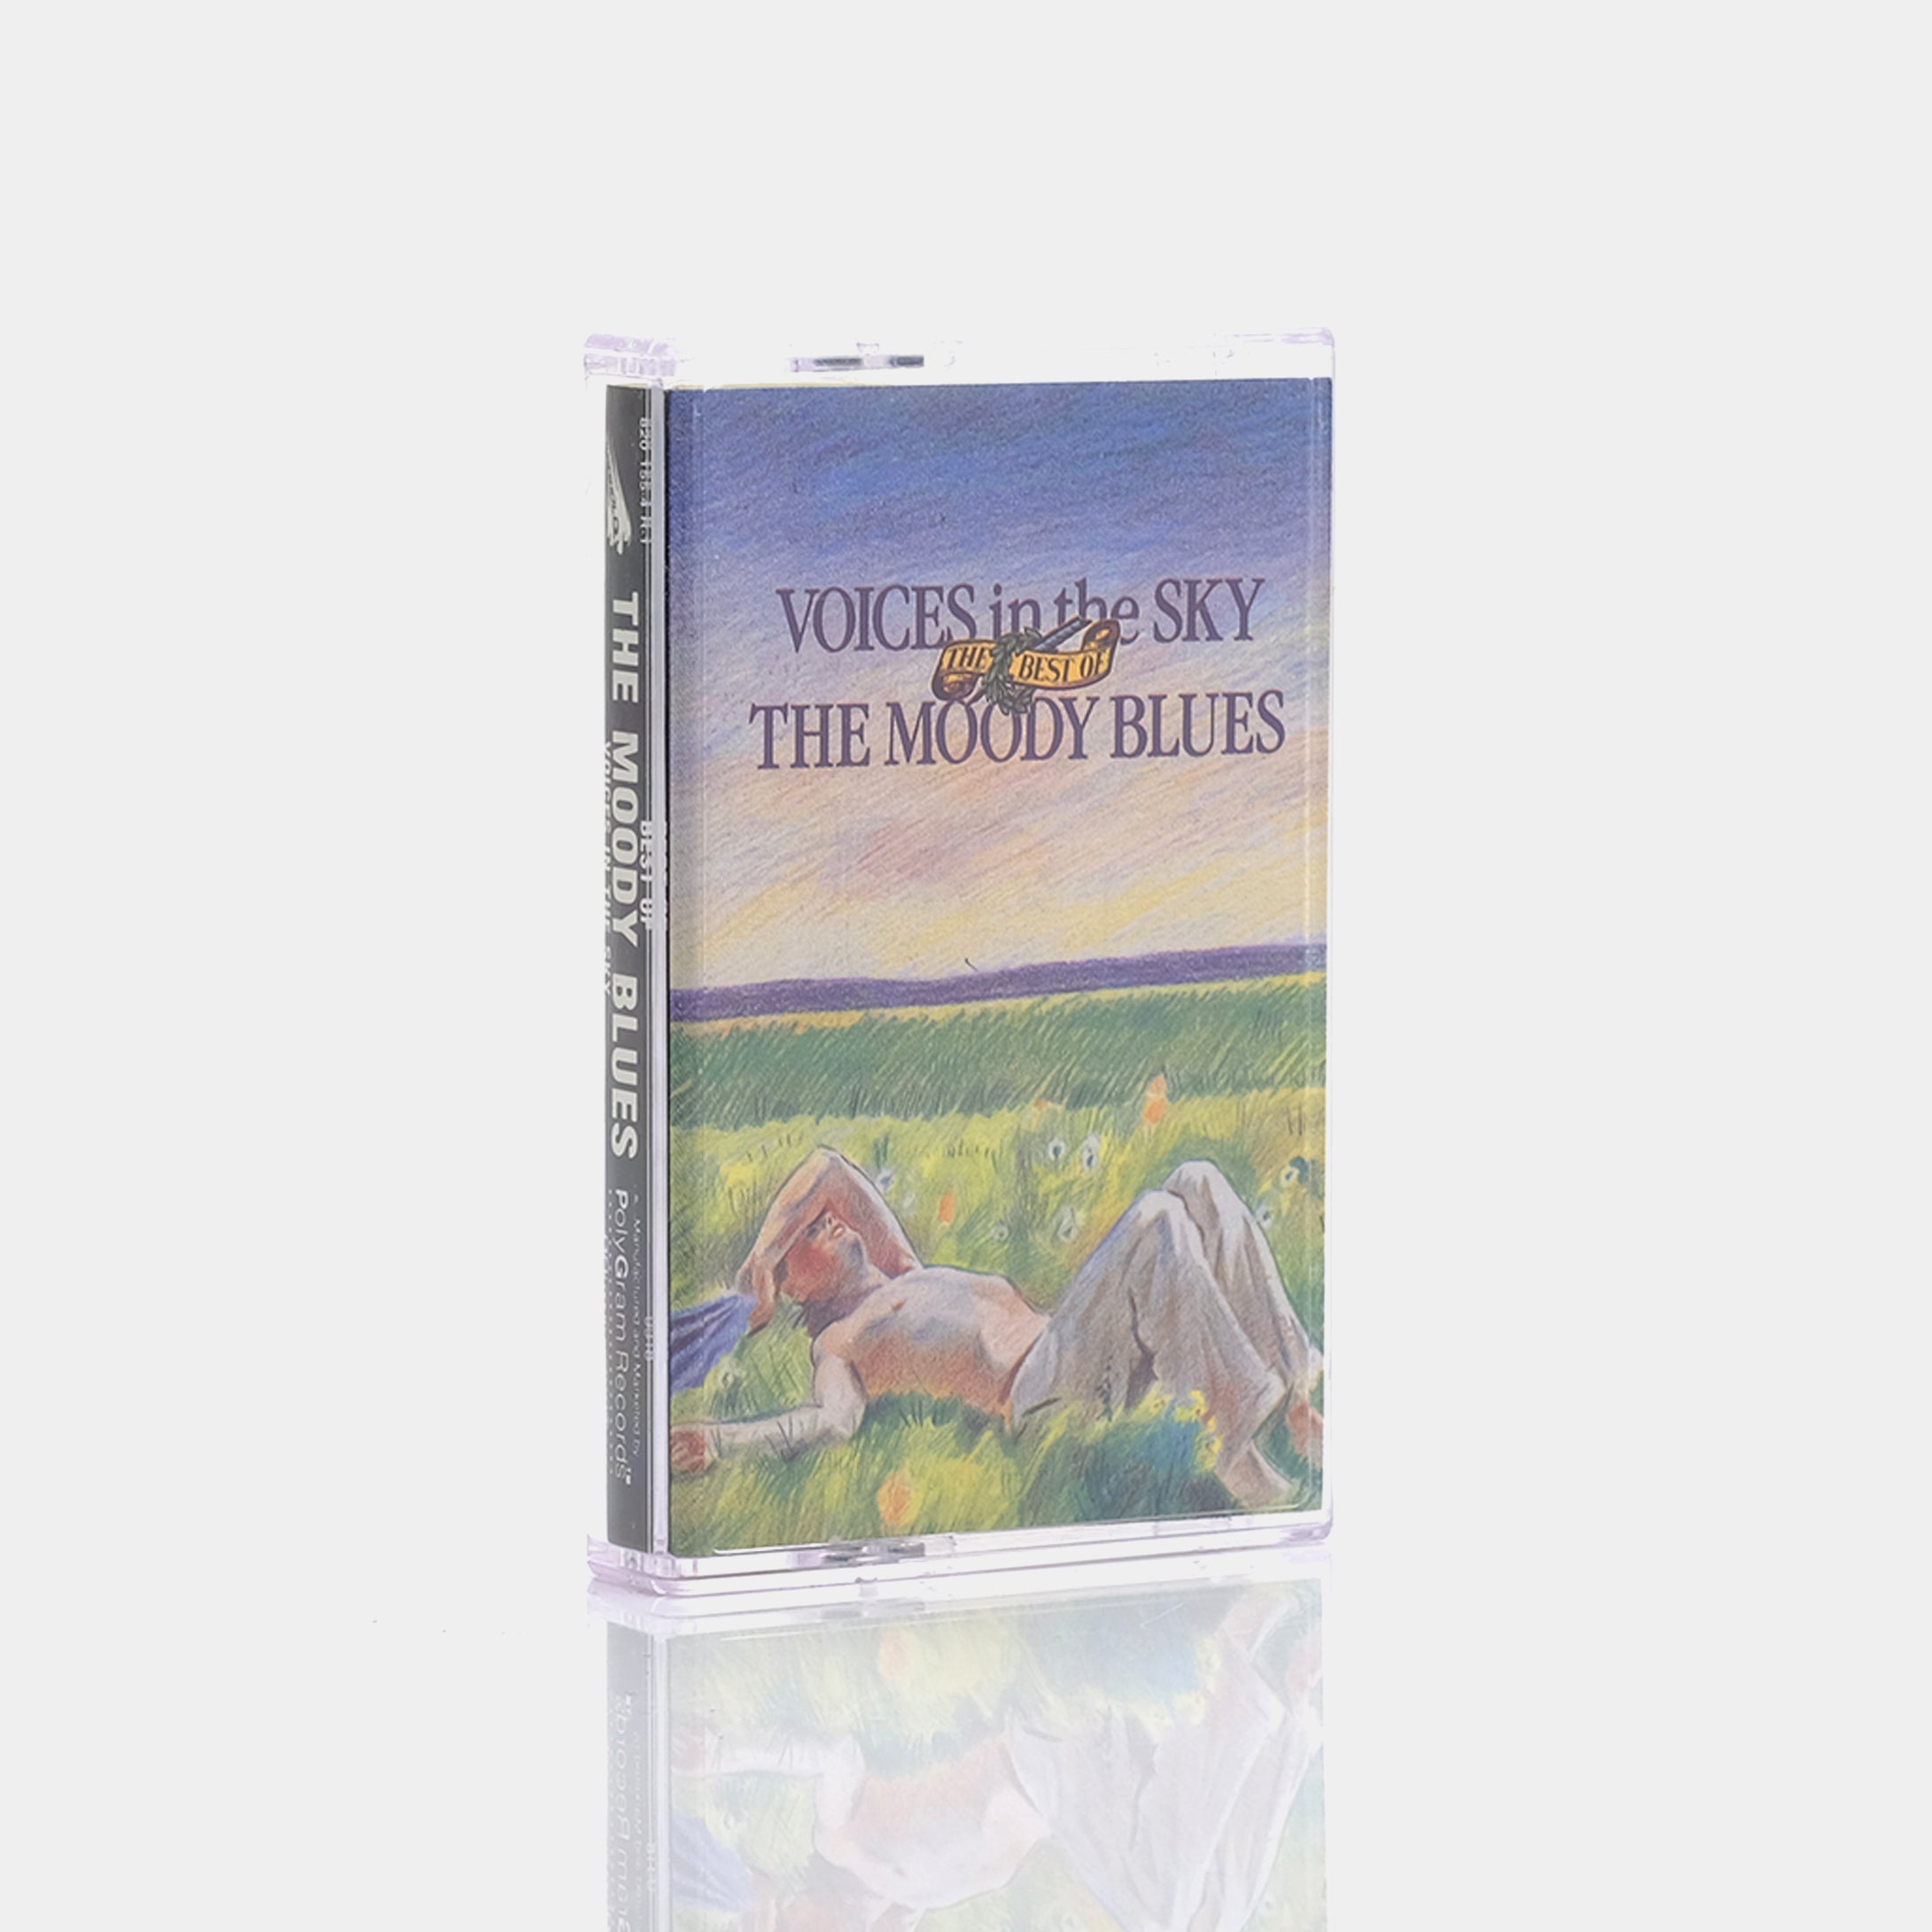 The Moody Blues - Voices In The Sky (The Best Of The Moody Blues) Cassette Tape